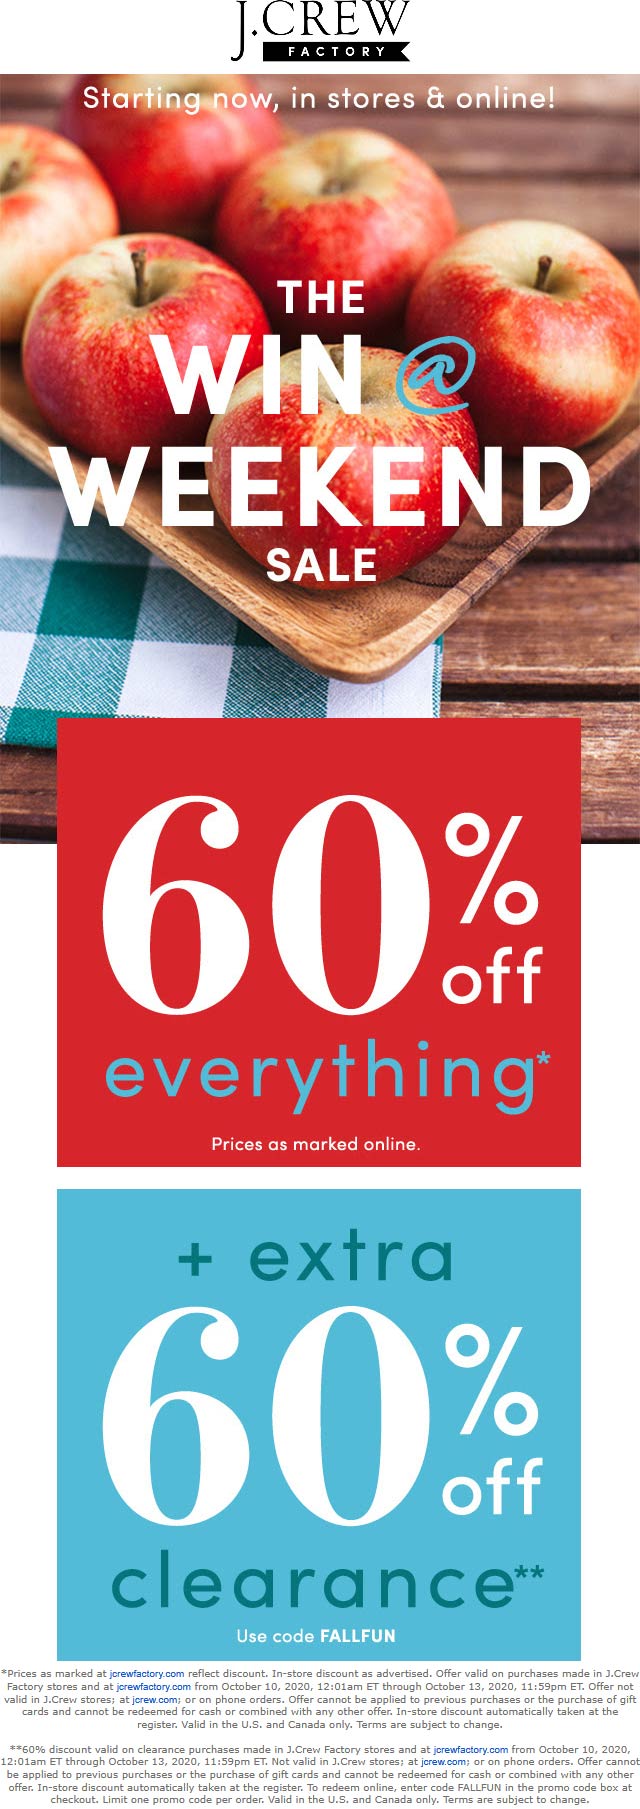 J.Crew Factory stores Coupon  60% off everything at J.Crew Factory, ditto online #jcrewfactory 